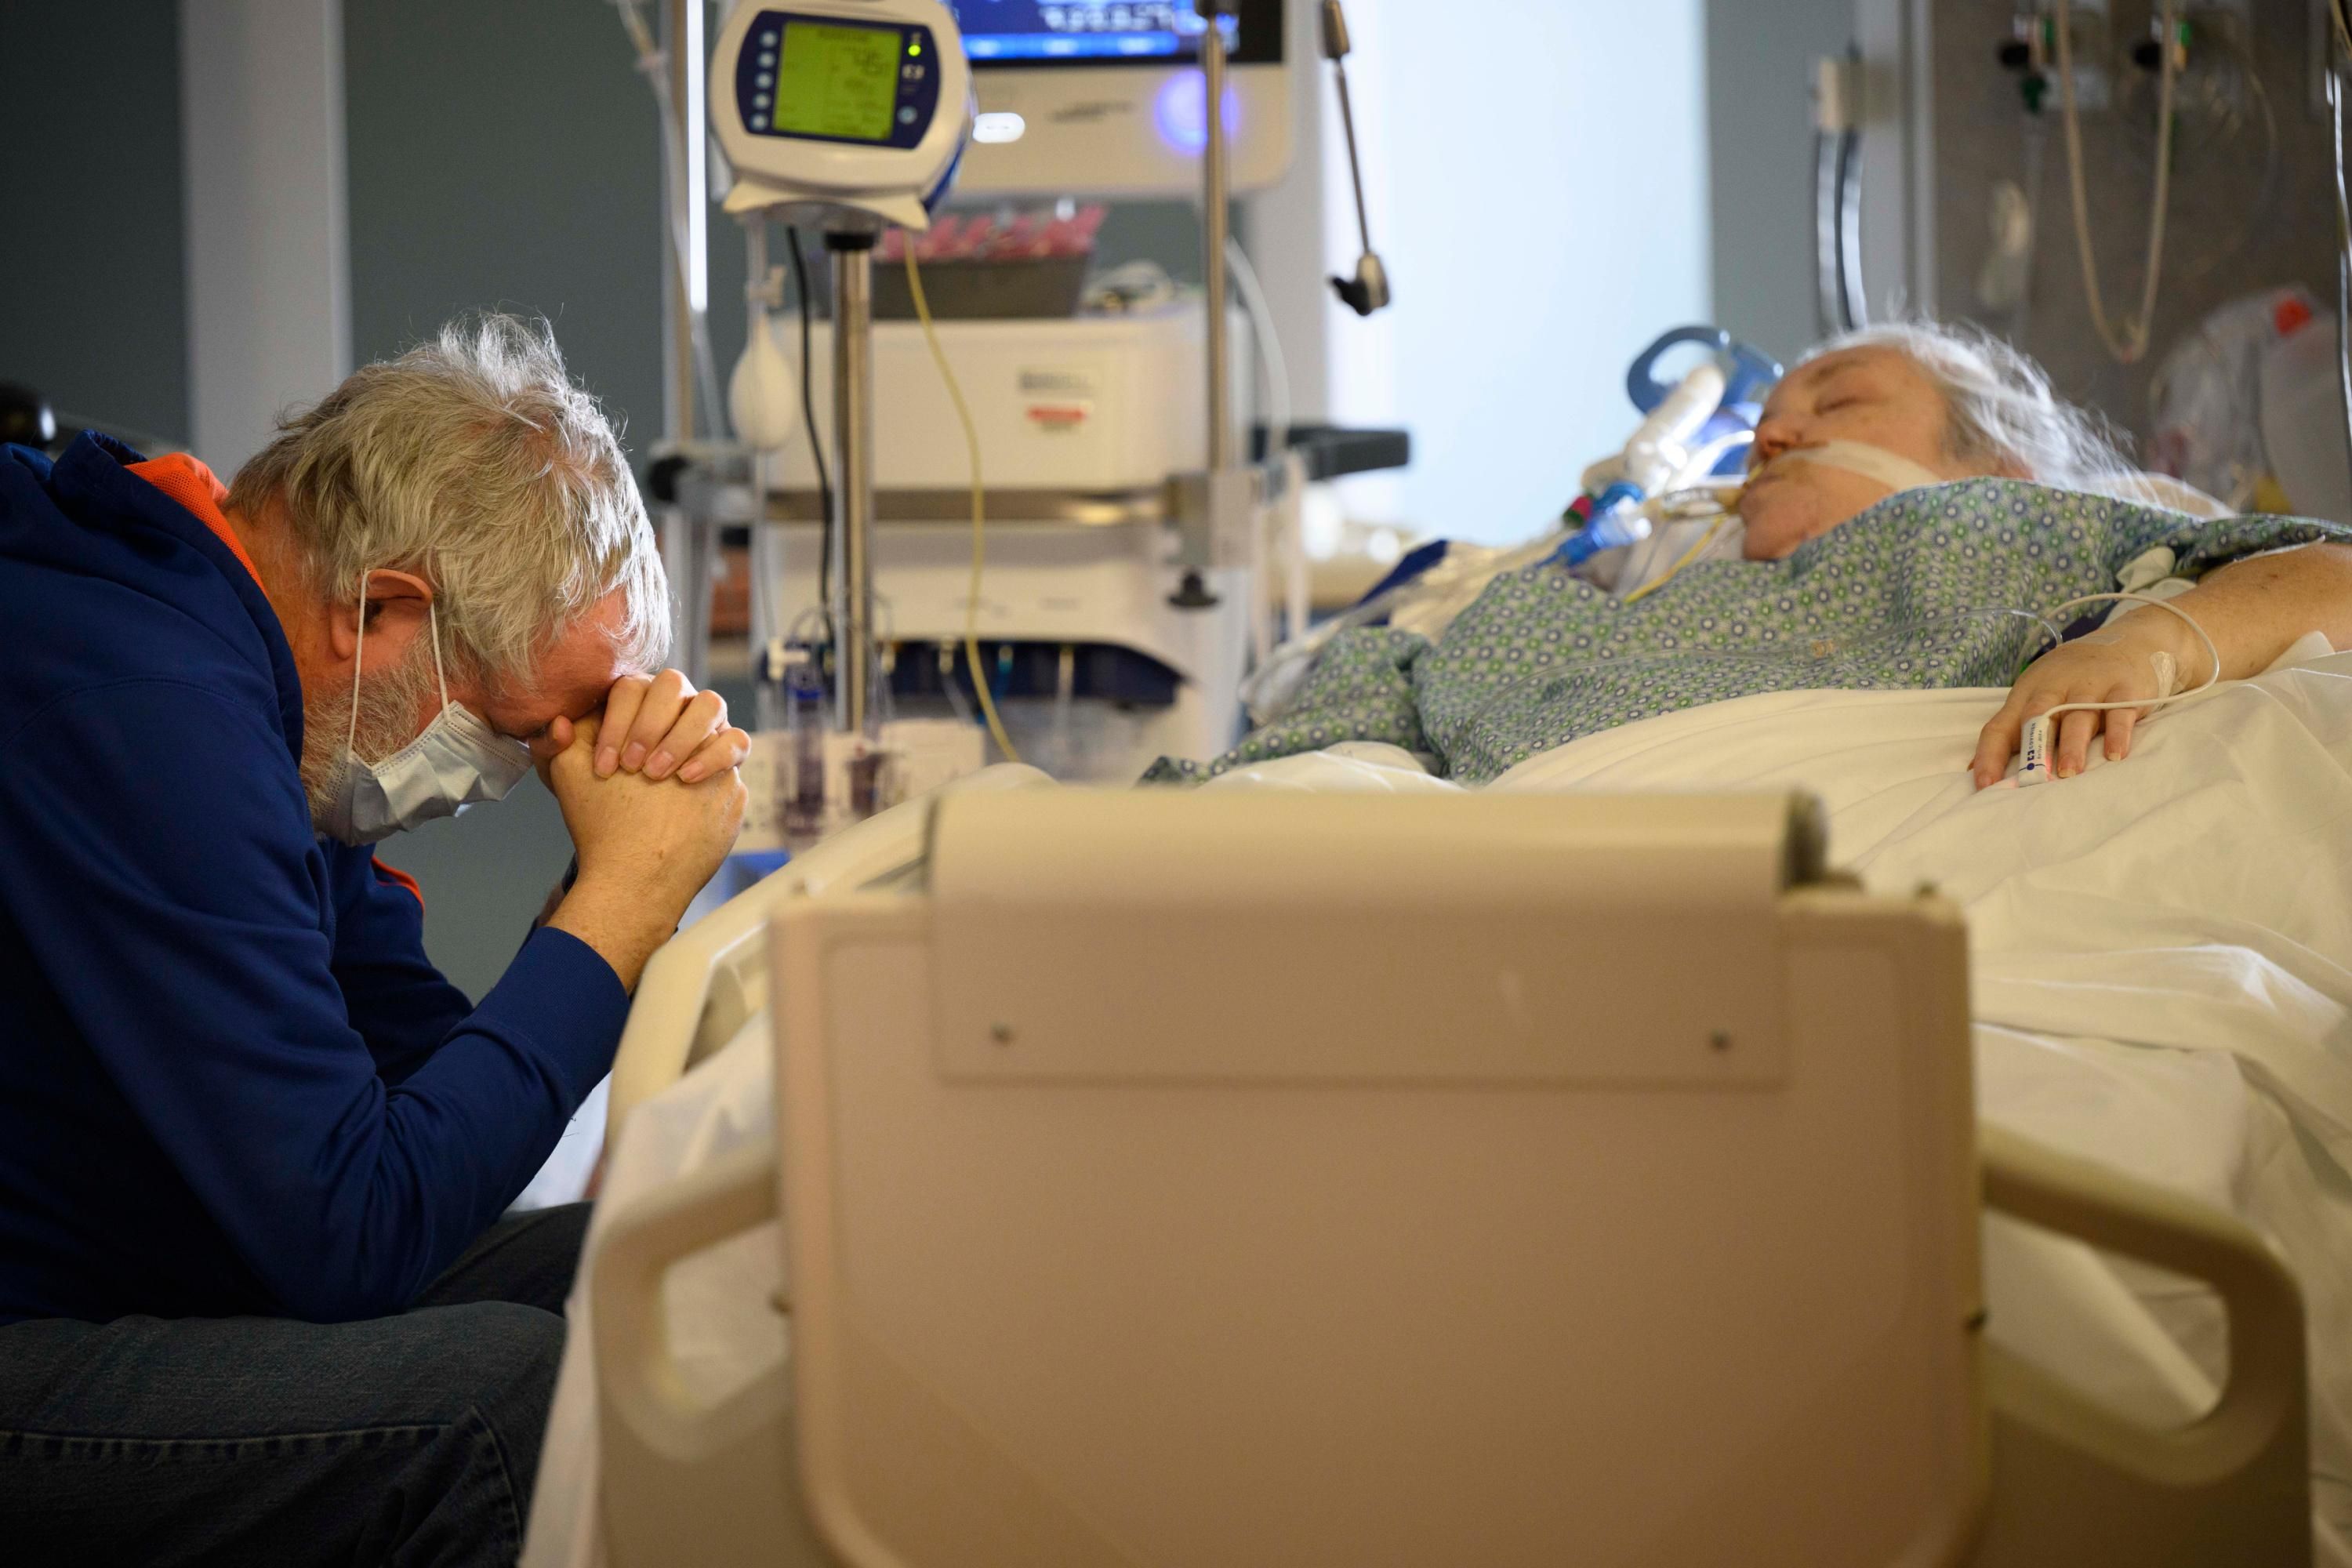 The husband of a Covid-19 patient prays at her bedside